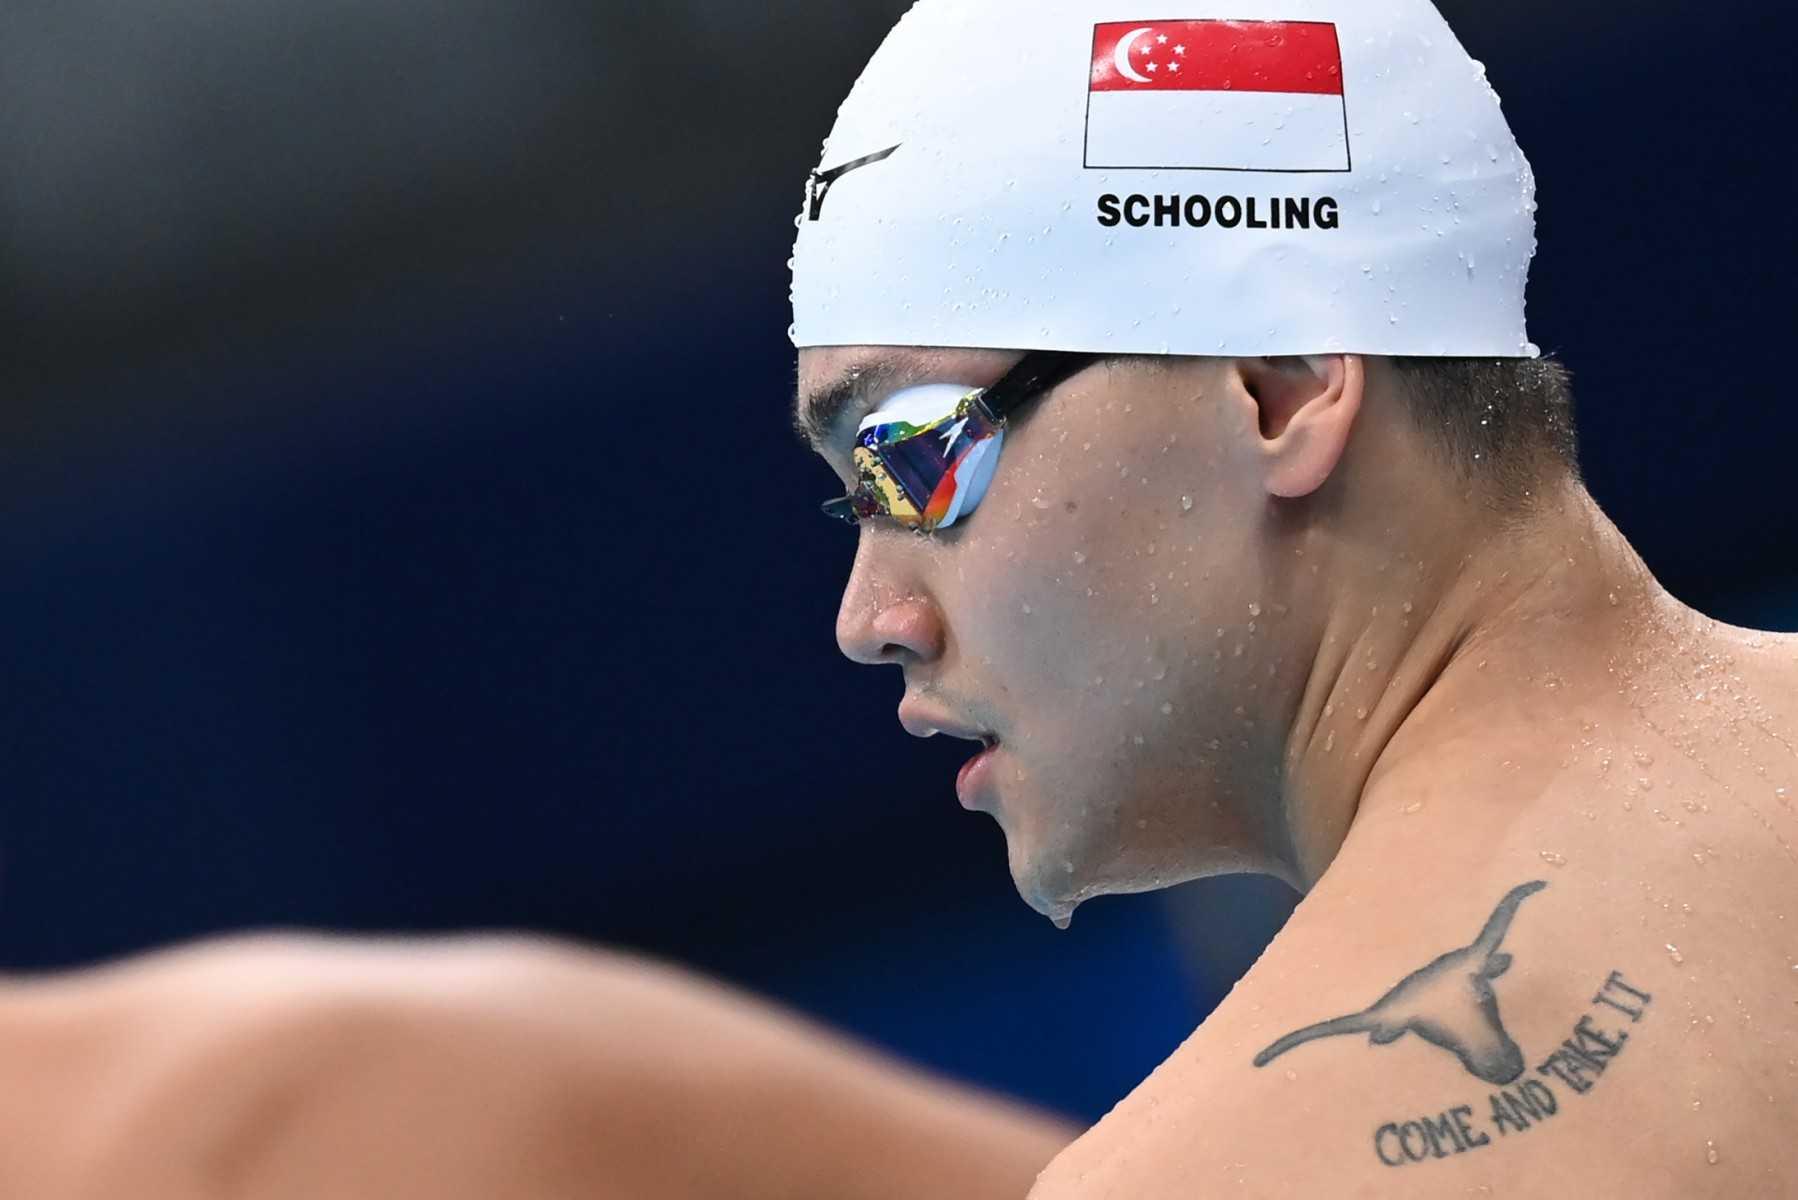 A tattoo is seen on the back of Singapore's Joseph Schooling as he prepares to compete in a heat for the men's 100m freestyle swimming event during the Tokyo 2020 Olympic Games at the Tokyo Aquatics Centre in Tokyo on July 27, 2021. Photo: AFP